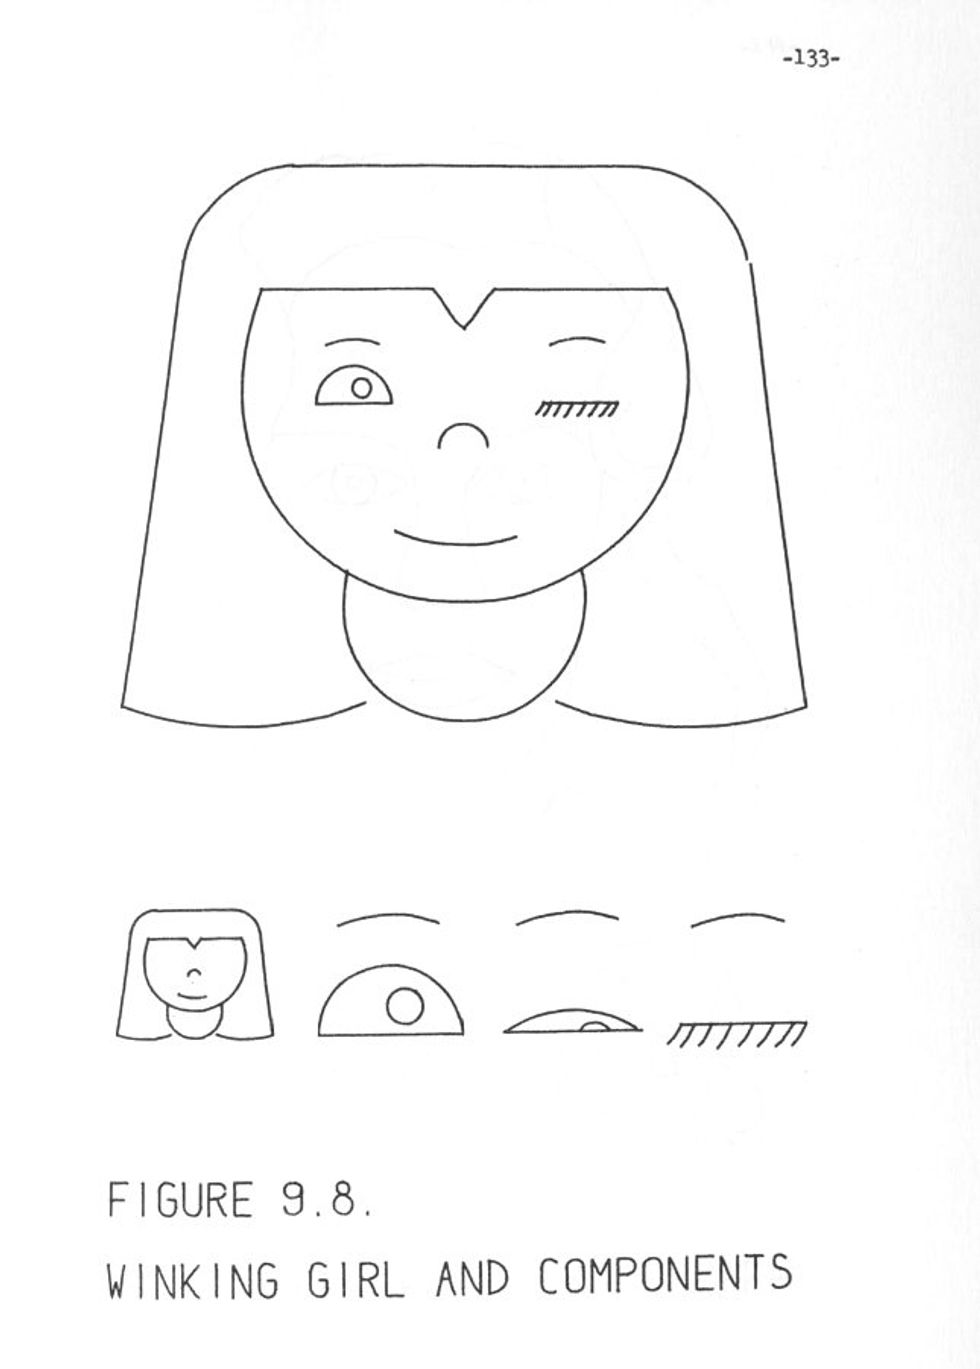 A simple line drawing of a girl who is winking.